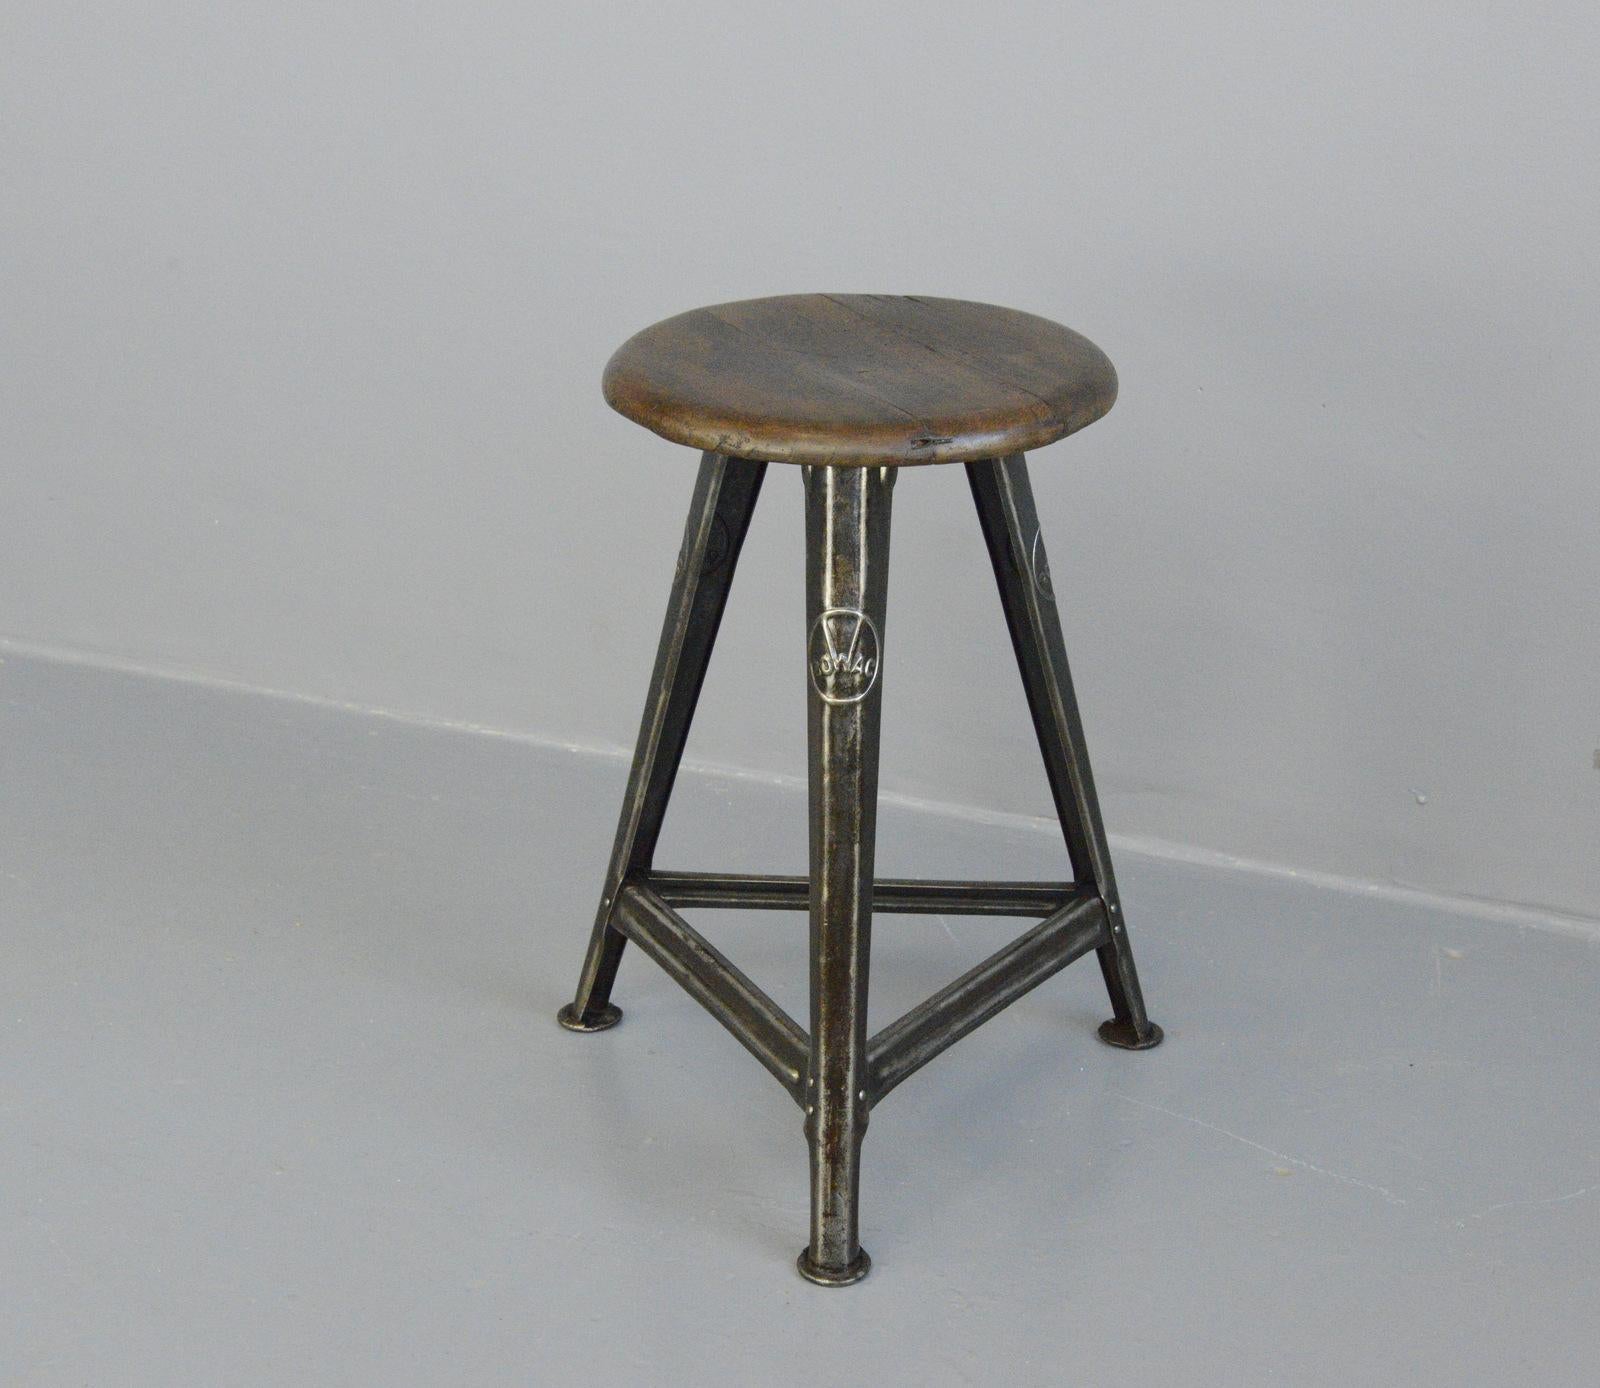 Industrial factory stool by Rowac, circa 1920s

- Branded on all 3 legs
- By Robert Wagner, Chemnitz
- German, 1920s
- Measures: 56cm tall x 35cm wide

Rowac

Robert Wagner’s founded his company in 1888 in Chemnitz, better known as Rowac.